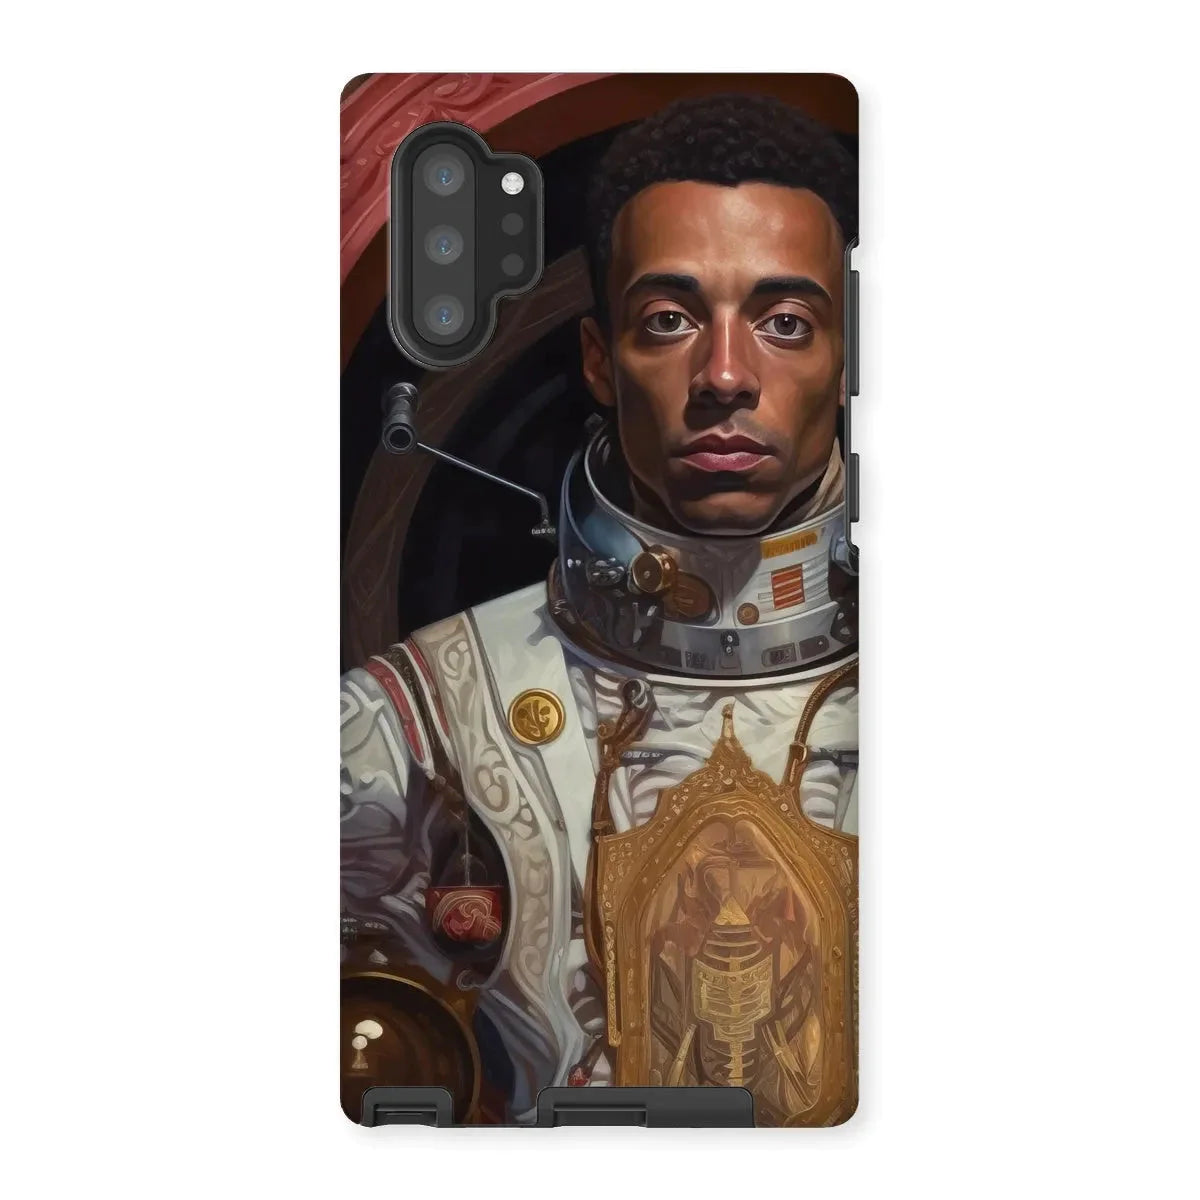 Amari The Gay Astronaut - Gay Aesthetic Art Phone Case - Samsung Galaxy Note 10p / Matte - Mobile Phone Cases